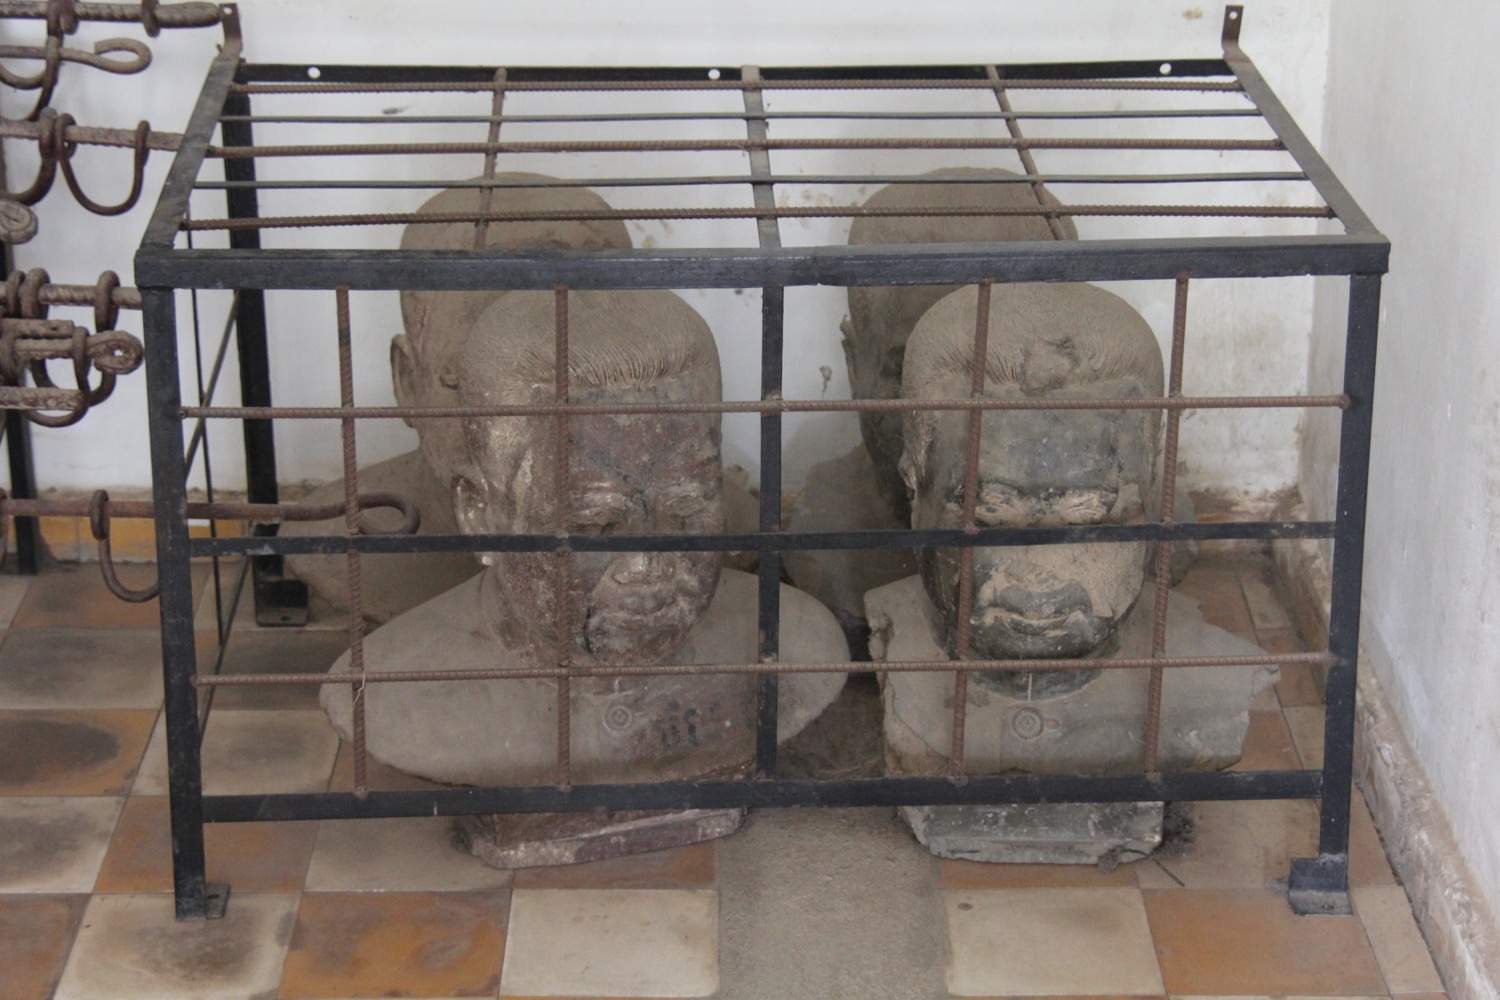 Tuol Sleng Genocide Museum - 12